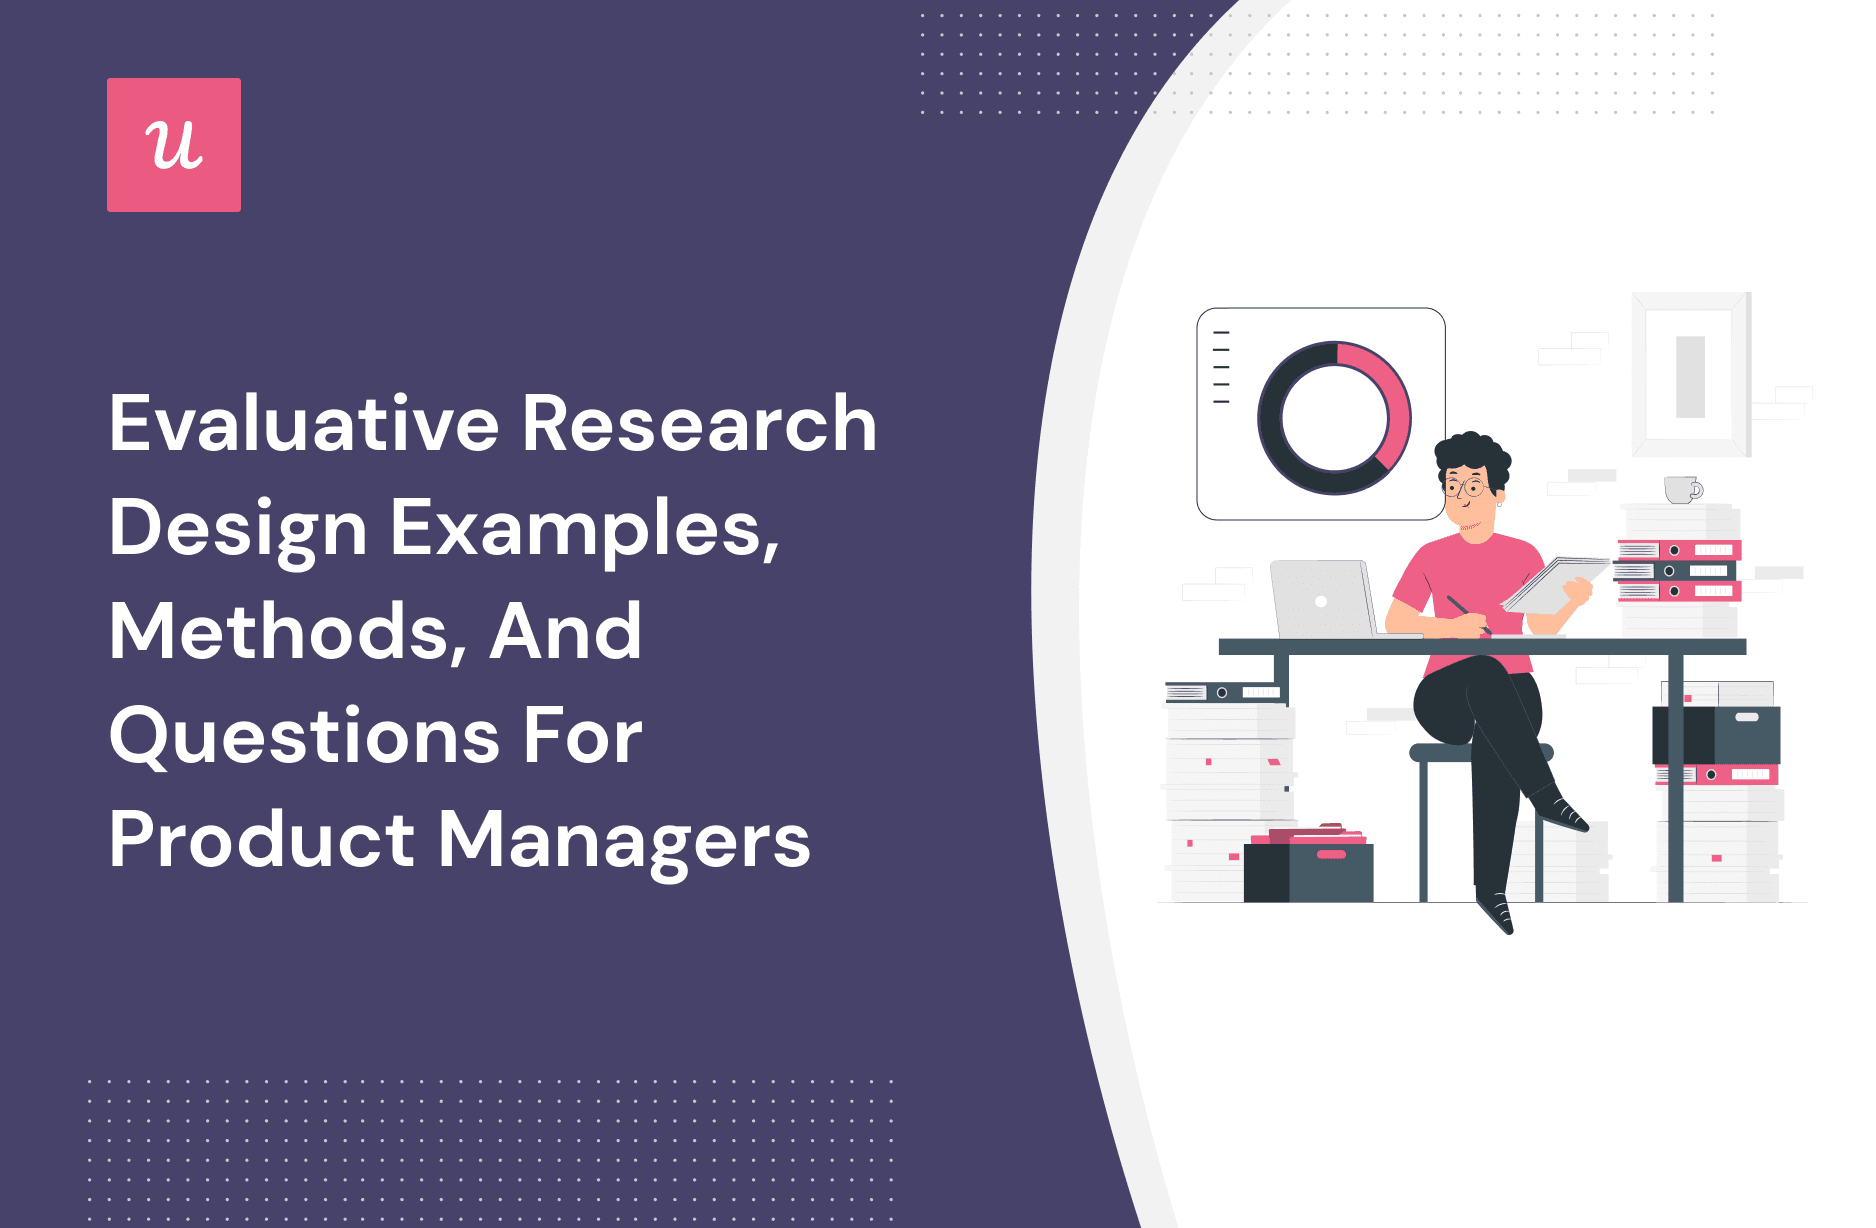 Evaluative Research Design Examples, Methods, And Questions For Product Managers cover